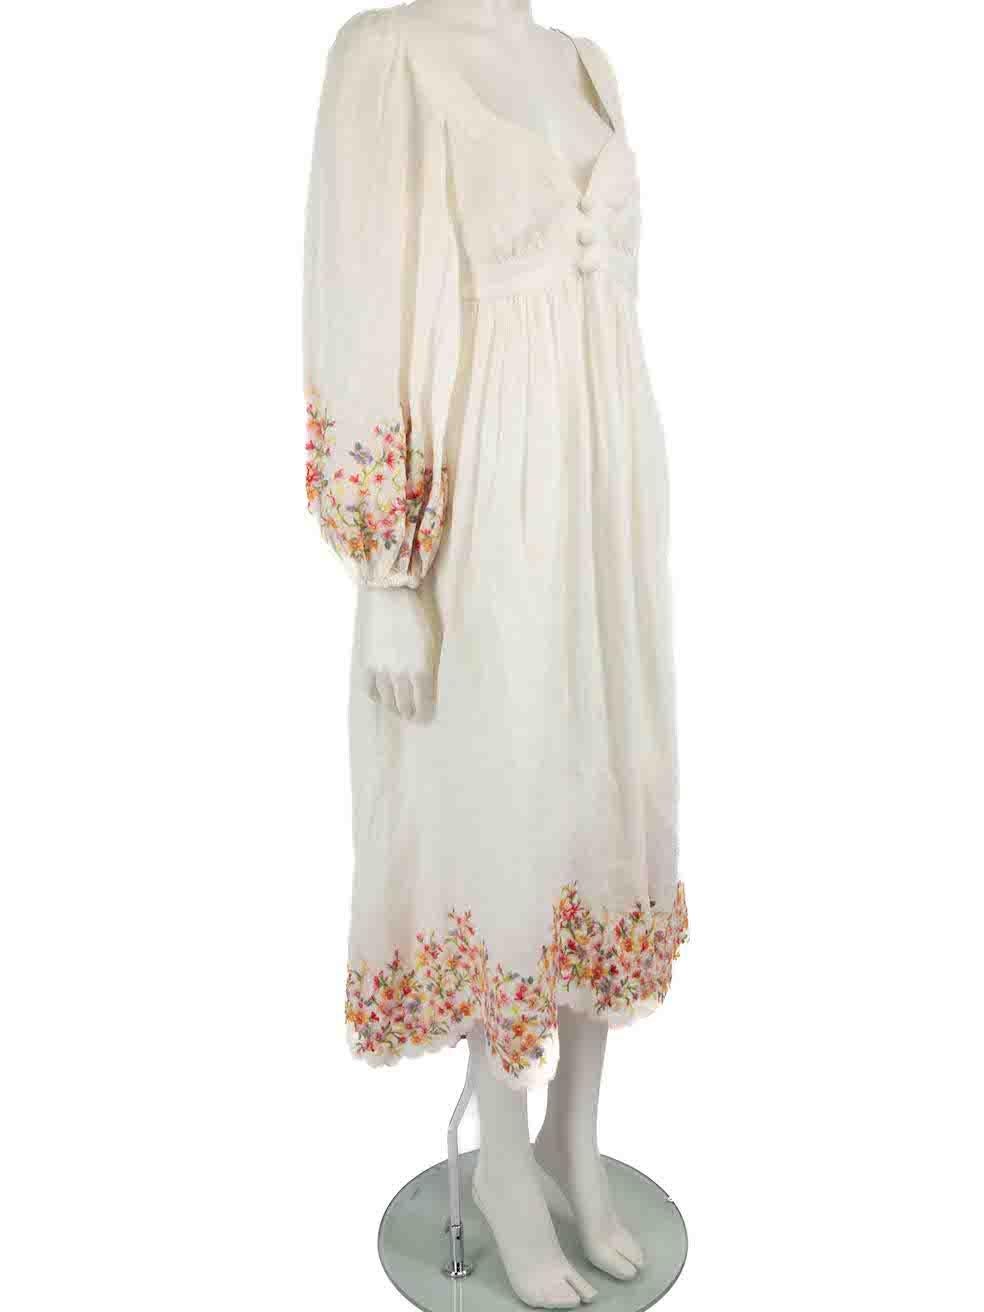 CONDITION is Good. General wear to dress is evident. Moderate signs of wear to the rear, underarms and underarm lining with discoloured marks to the linen on this used Zimmermann designer resale item.
 
 Details
 White
 Linen
 Midi dress
 Floral